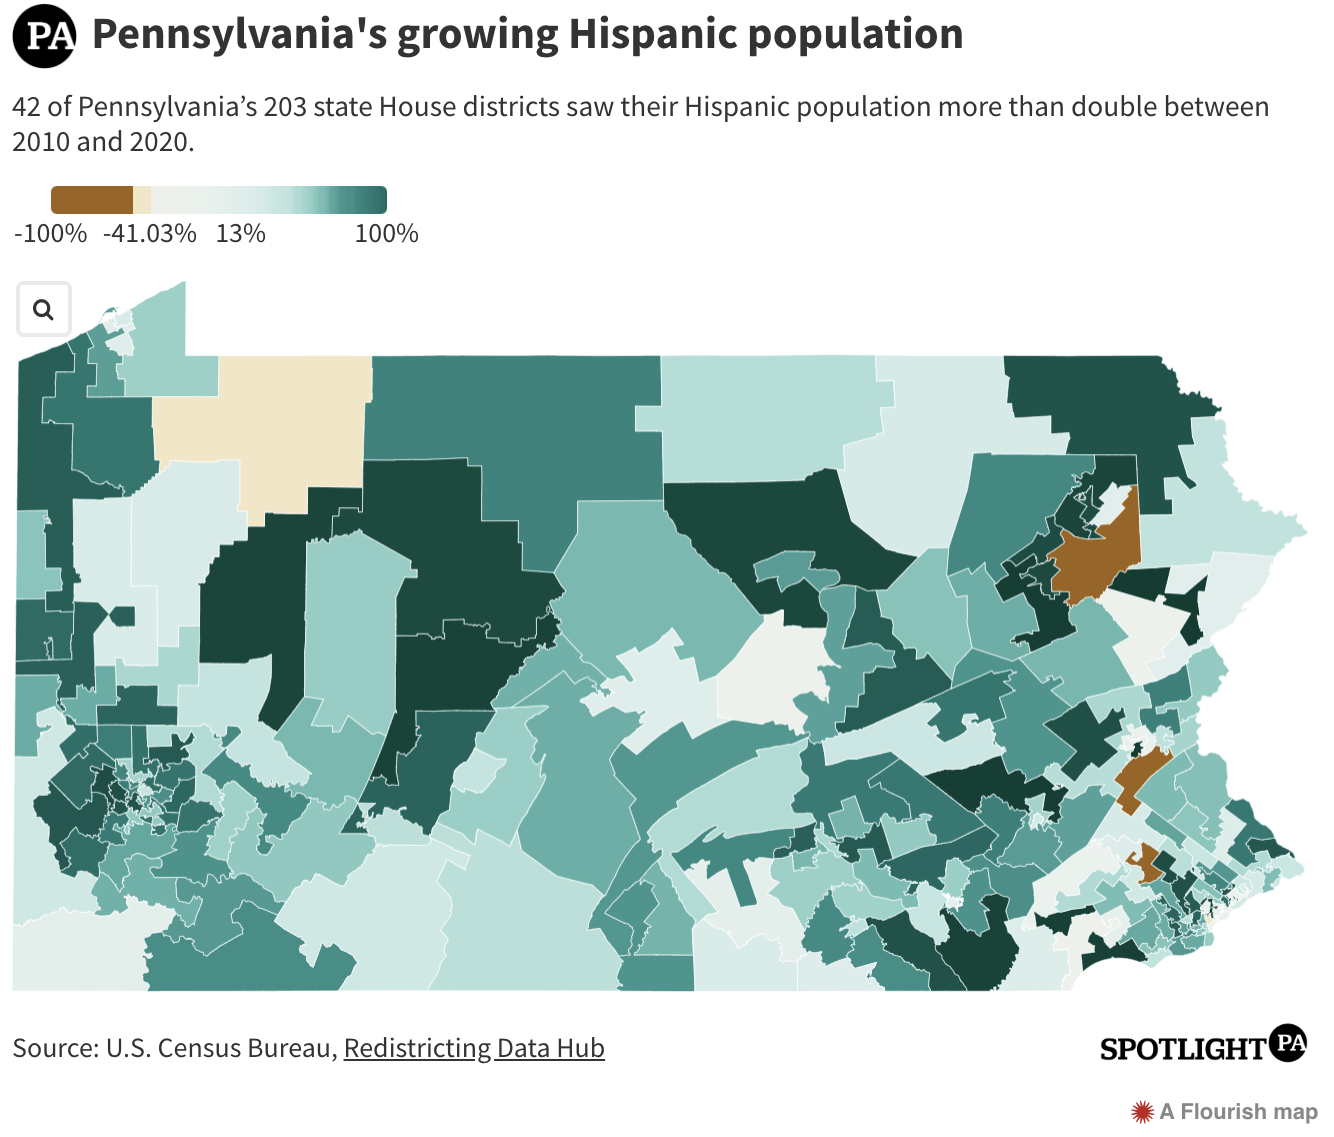 Pennsylavania's Growing Hispanic Population 42 of Pennsylvania’s 203 state House districts saw their Hispanic population more than double between 2010 and 2020.